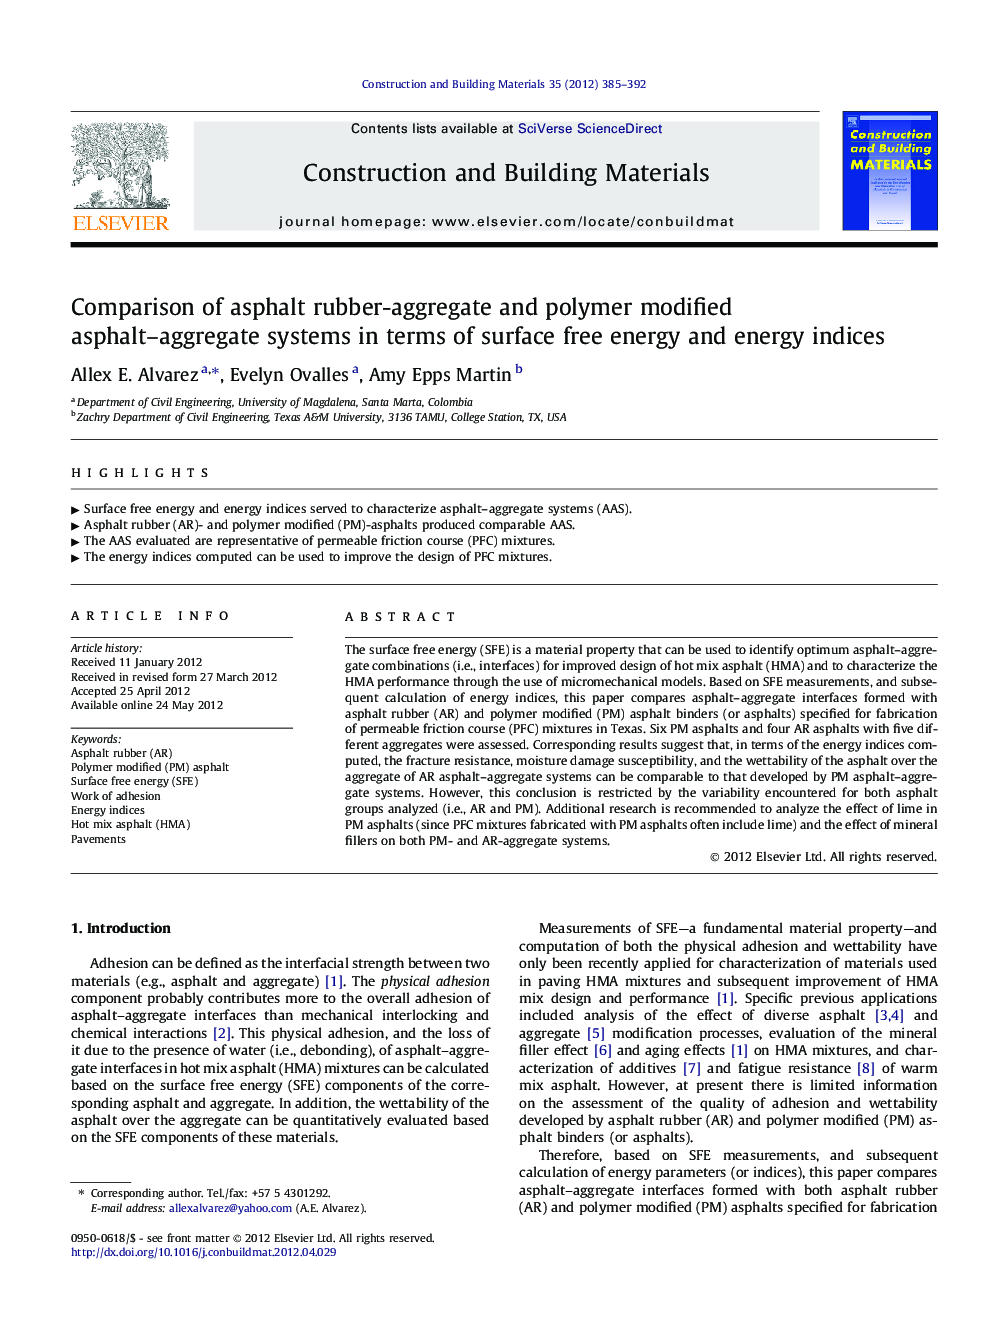 Comparison of asphalt rubber-aggregate and polymer modified asphalt–aggregate systems in terms of surface free energy and energy indices